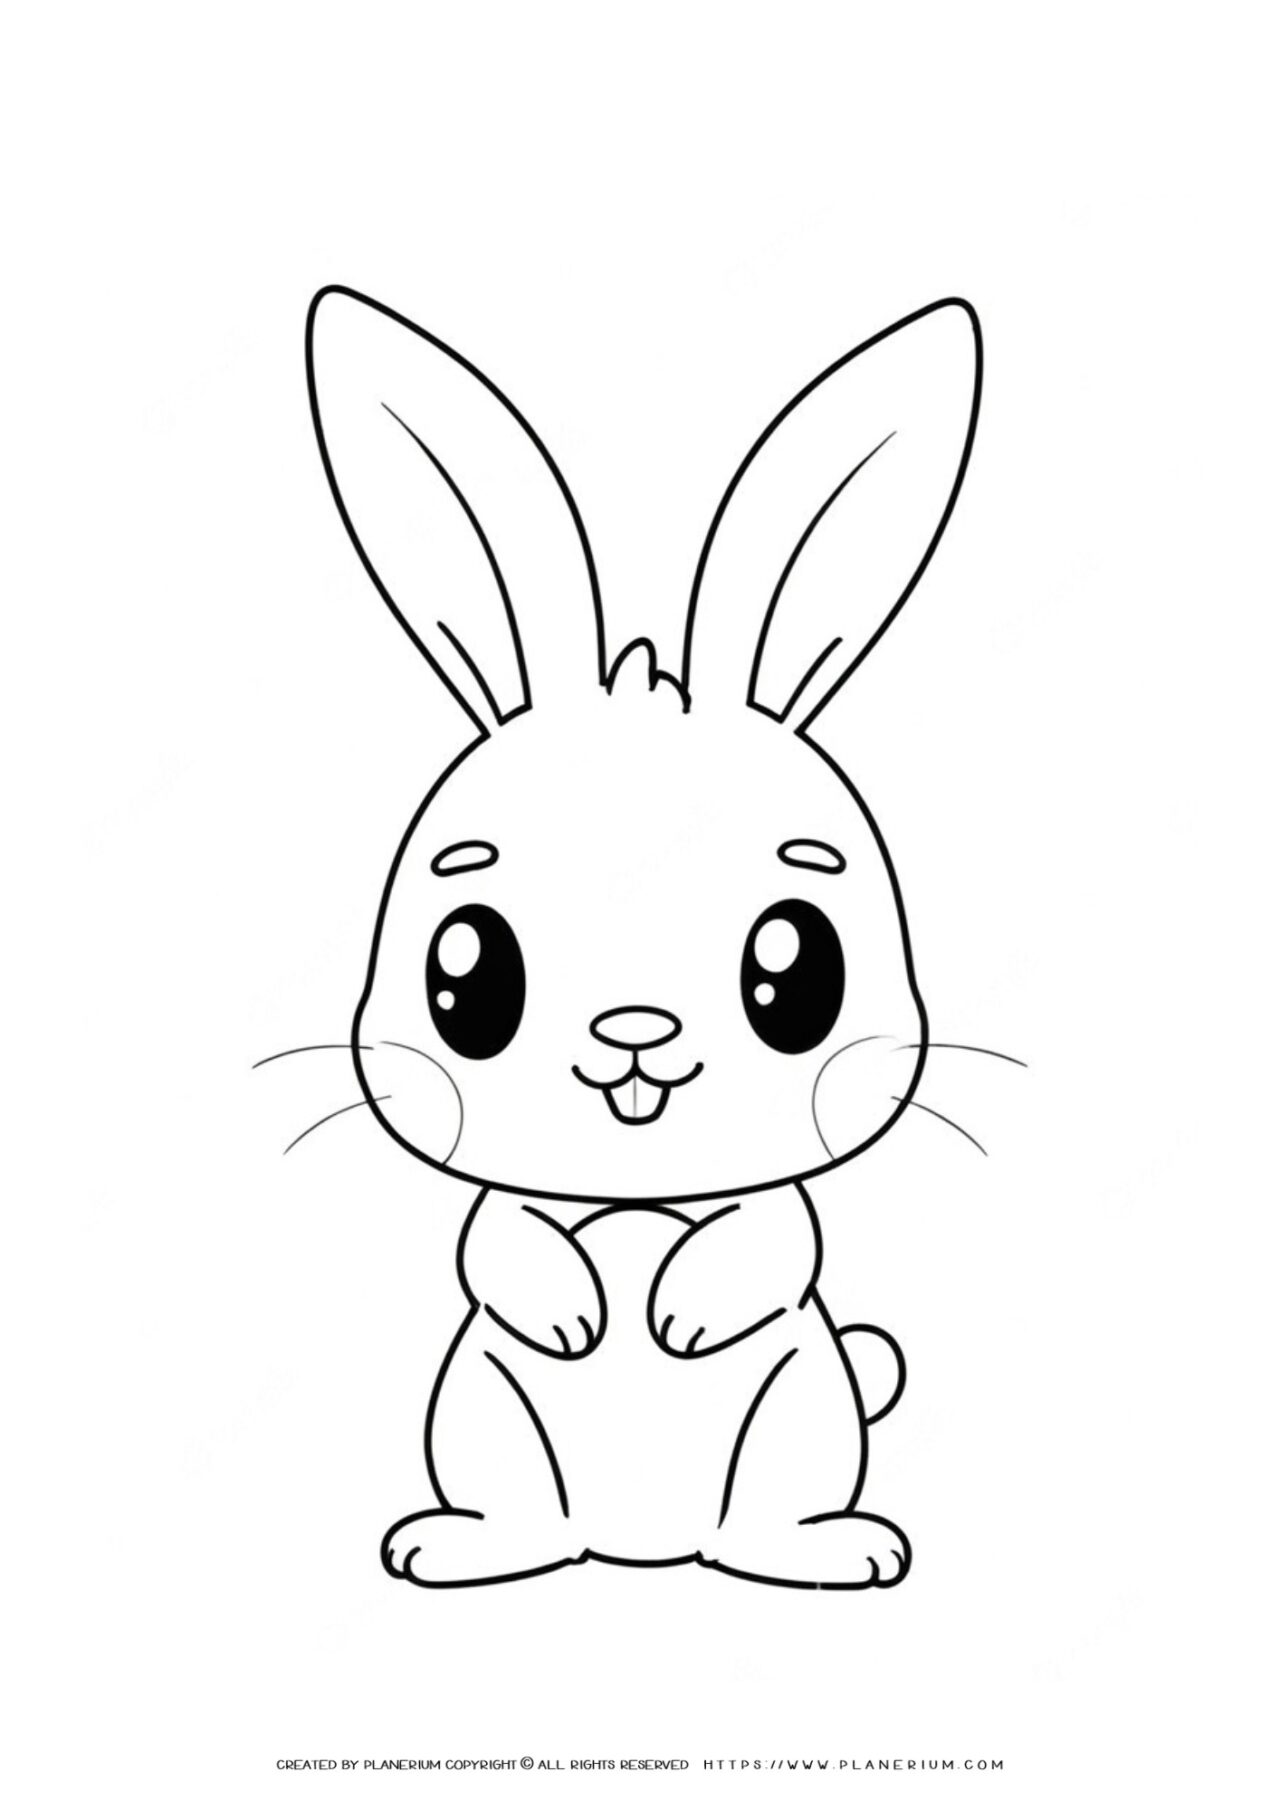 outline-of-a-bunny-rabit